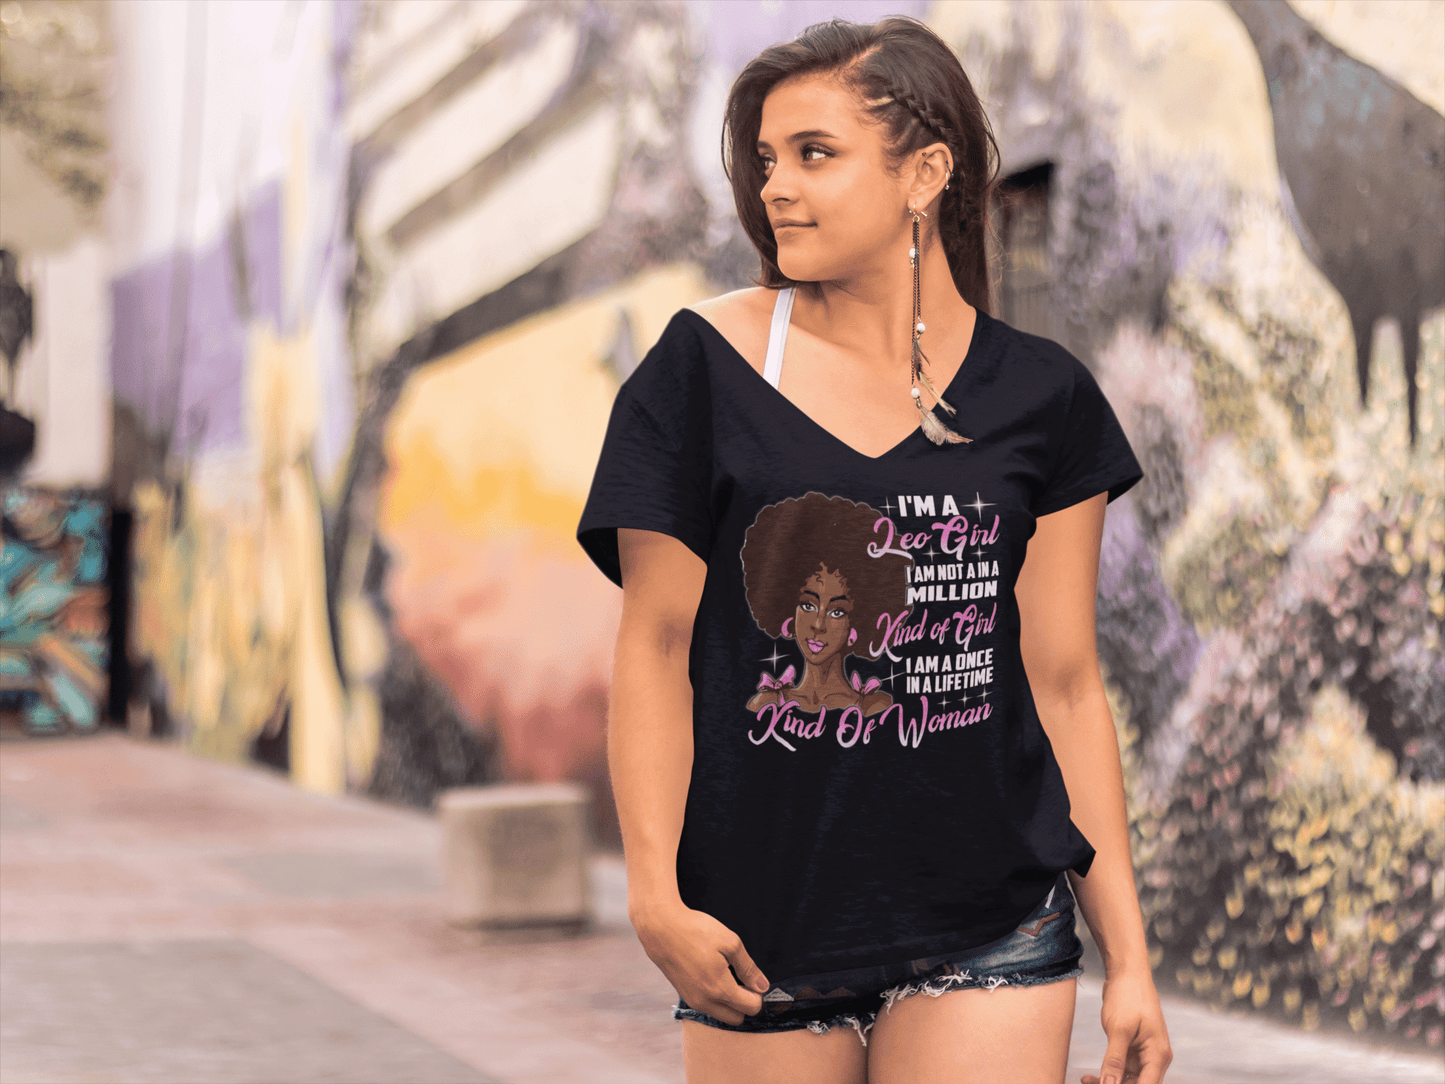 ULTRABASIC Women's T-Shirt I'm a Leo Girl Once in a Lifetime Kind of Women - Birthday Shirt for Ladies